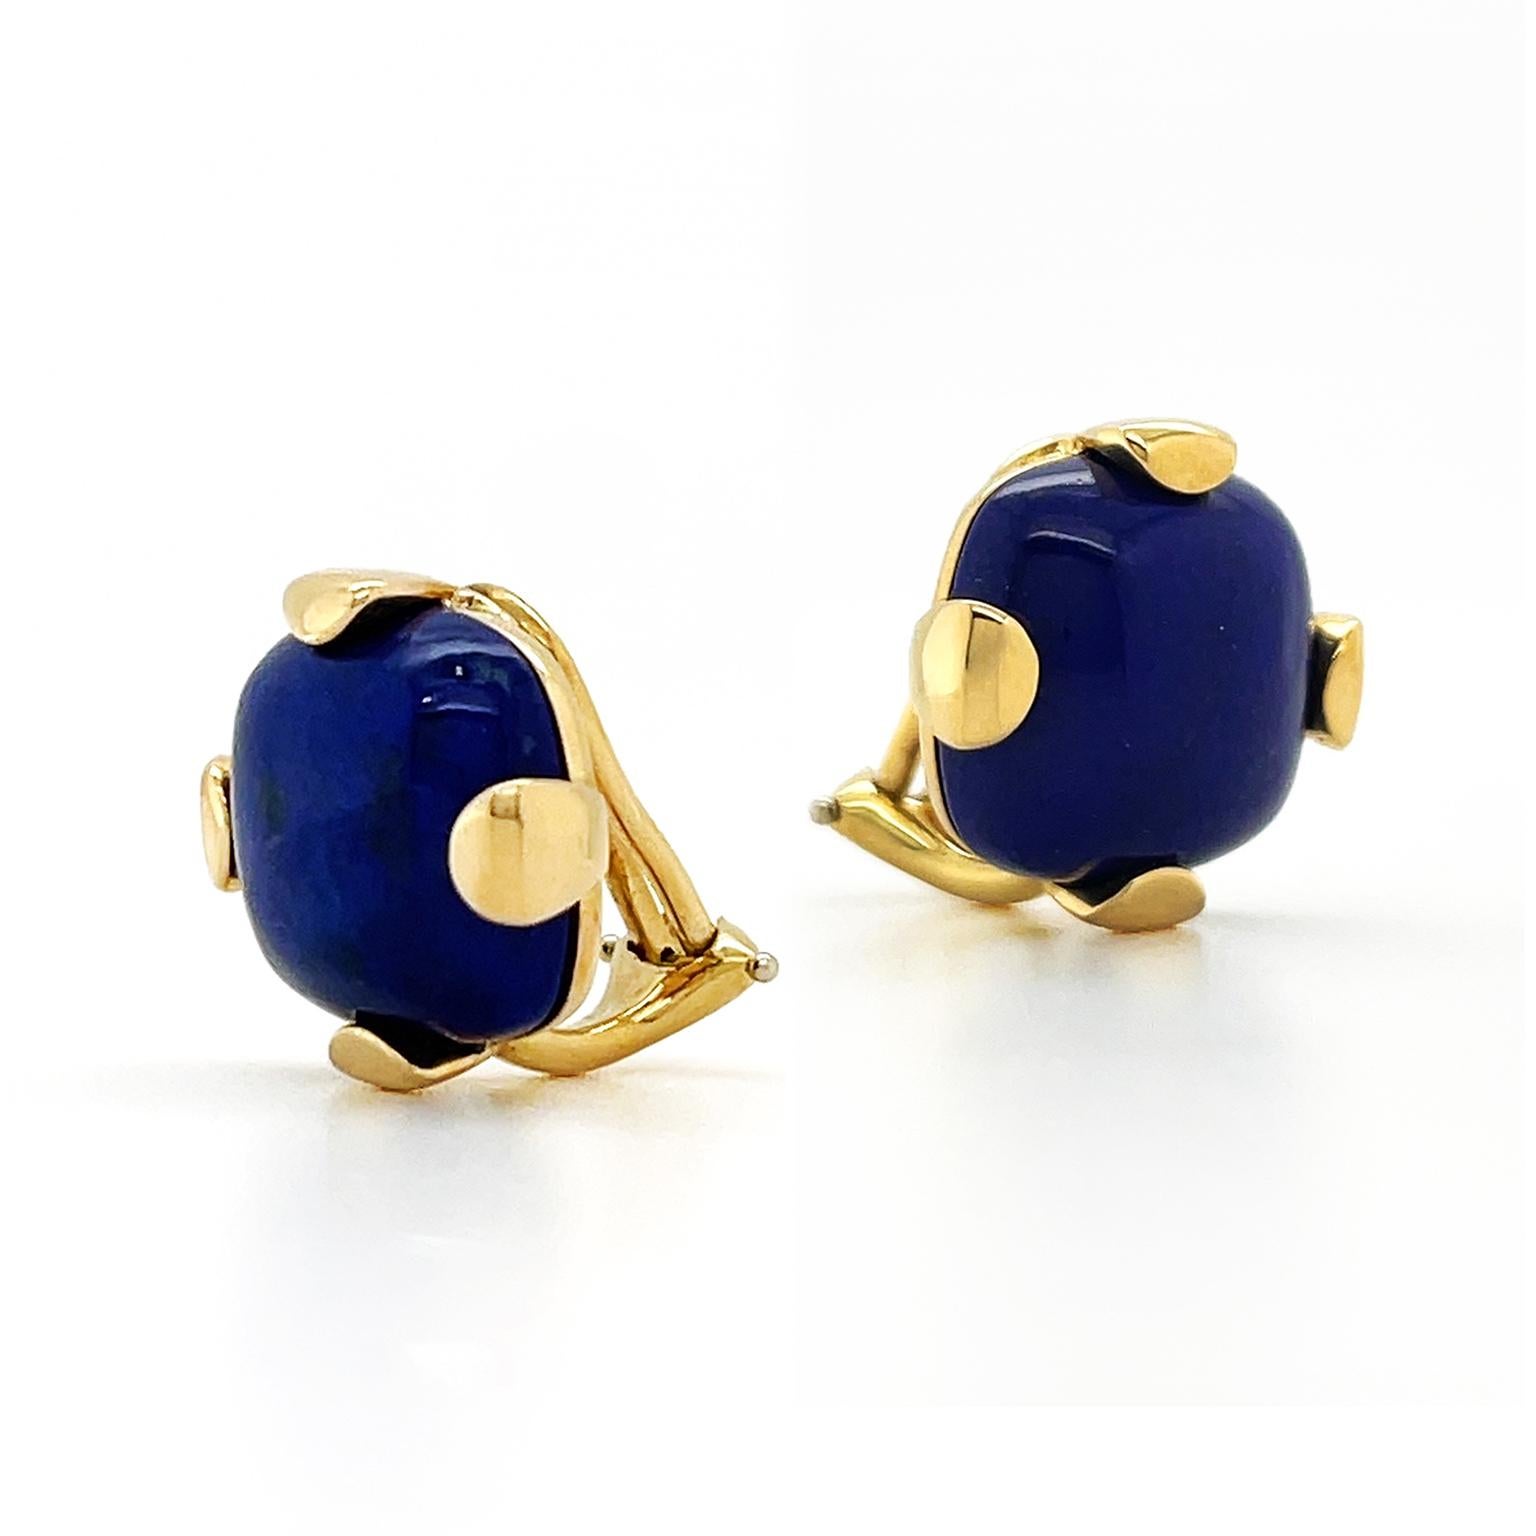 The regal pairing of blue-violet and gold is the focus of these earrings. Lapis lazuli is carved into a raised cushion cut, heightening its deep hue. Rounded 18k yellow gold prongs wrap around each side of the gem while underlining the gold